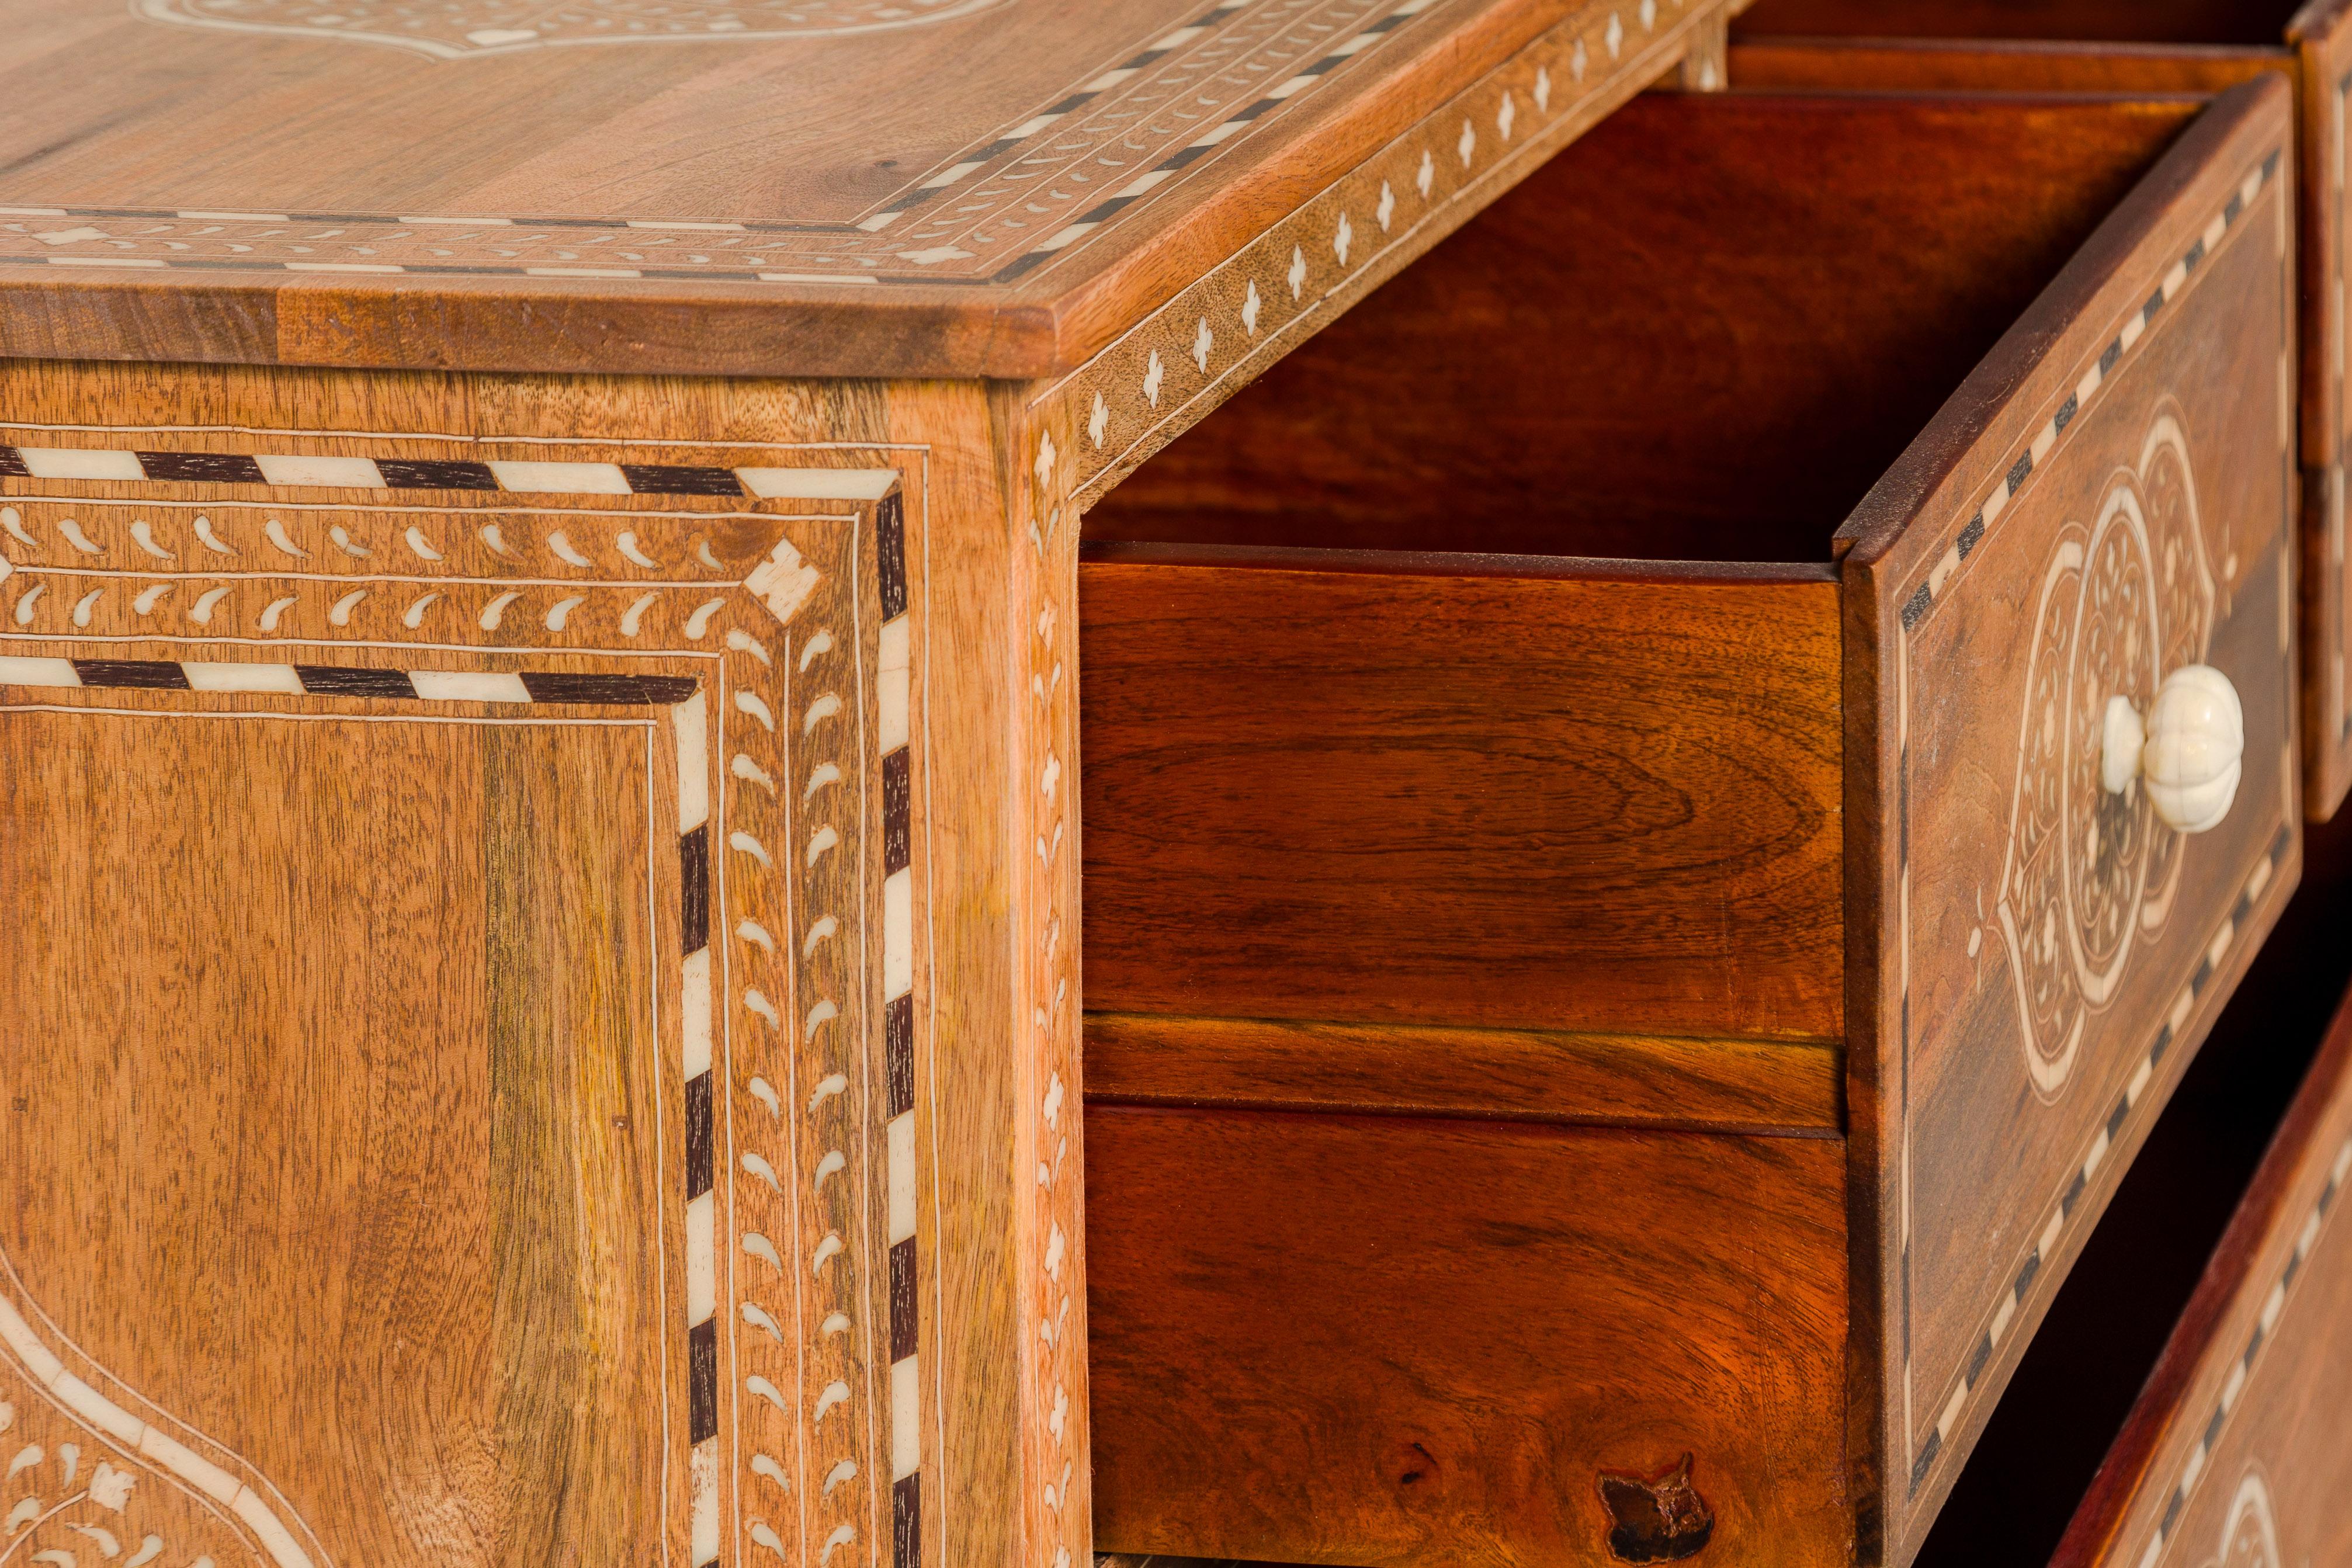 Anglo Indian Style Mango Wood Chest with Four Drawers and Floral Bone Inlay For Sale 7